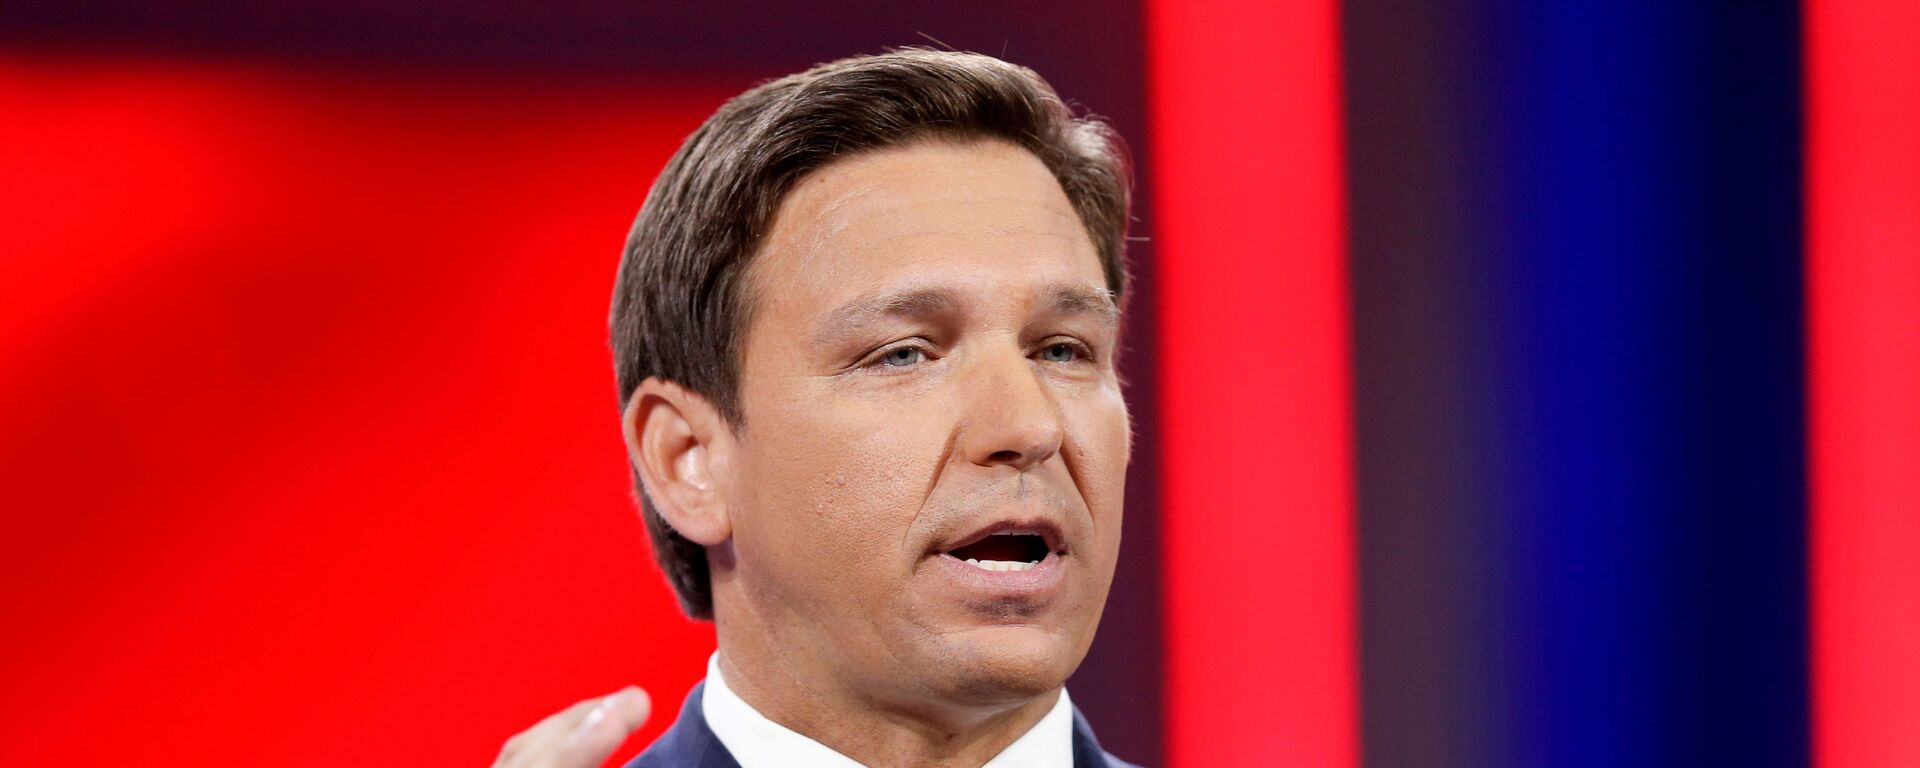 Florida Gov. Ron DeSantis speaks during the welcome segment of the Conservative Political Action Conference (CPAC) in Orlando, Florida, U.S. February 26, 2021 - Sputnik International, 1920, 28.10.2021